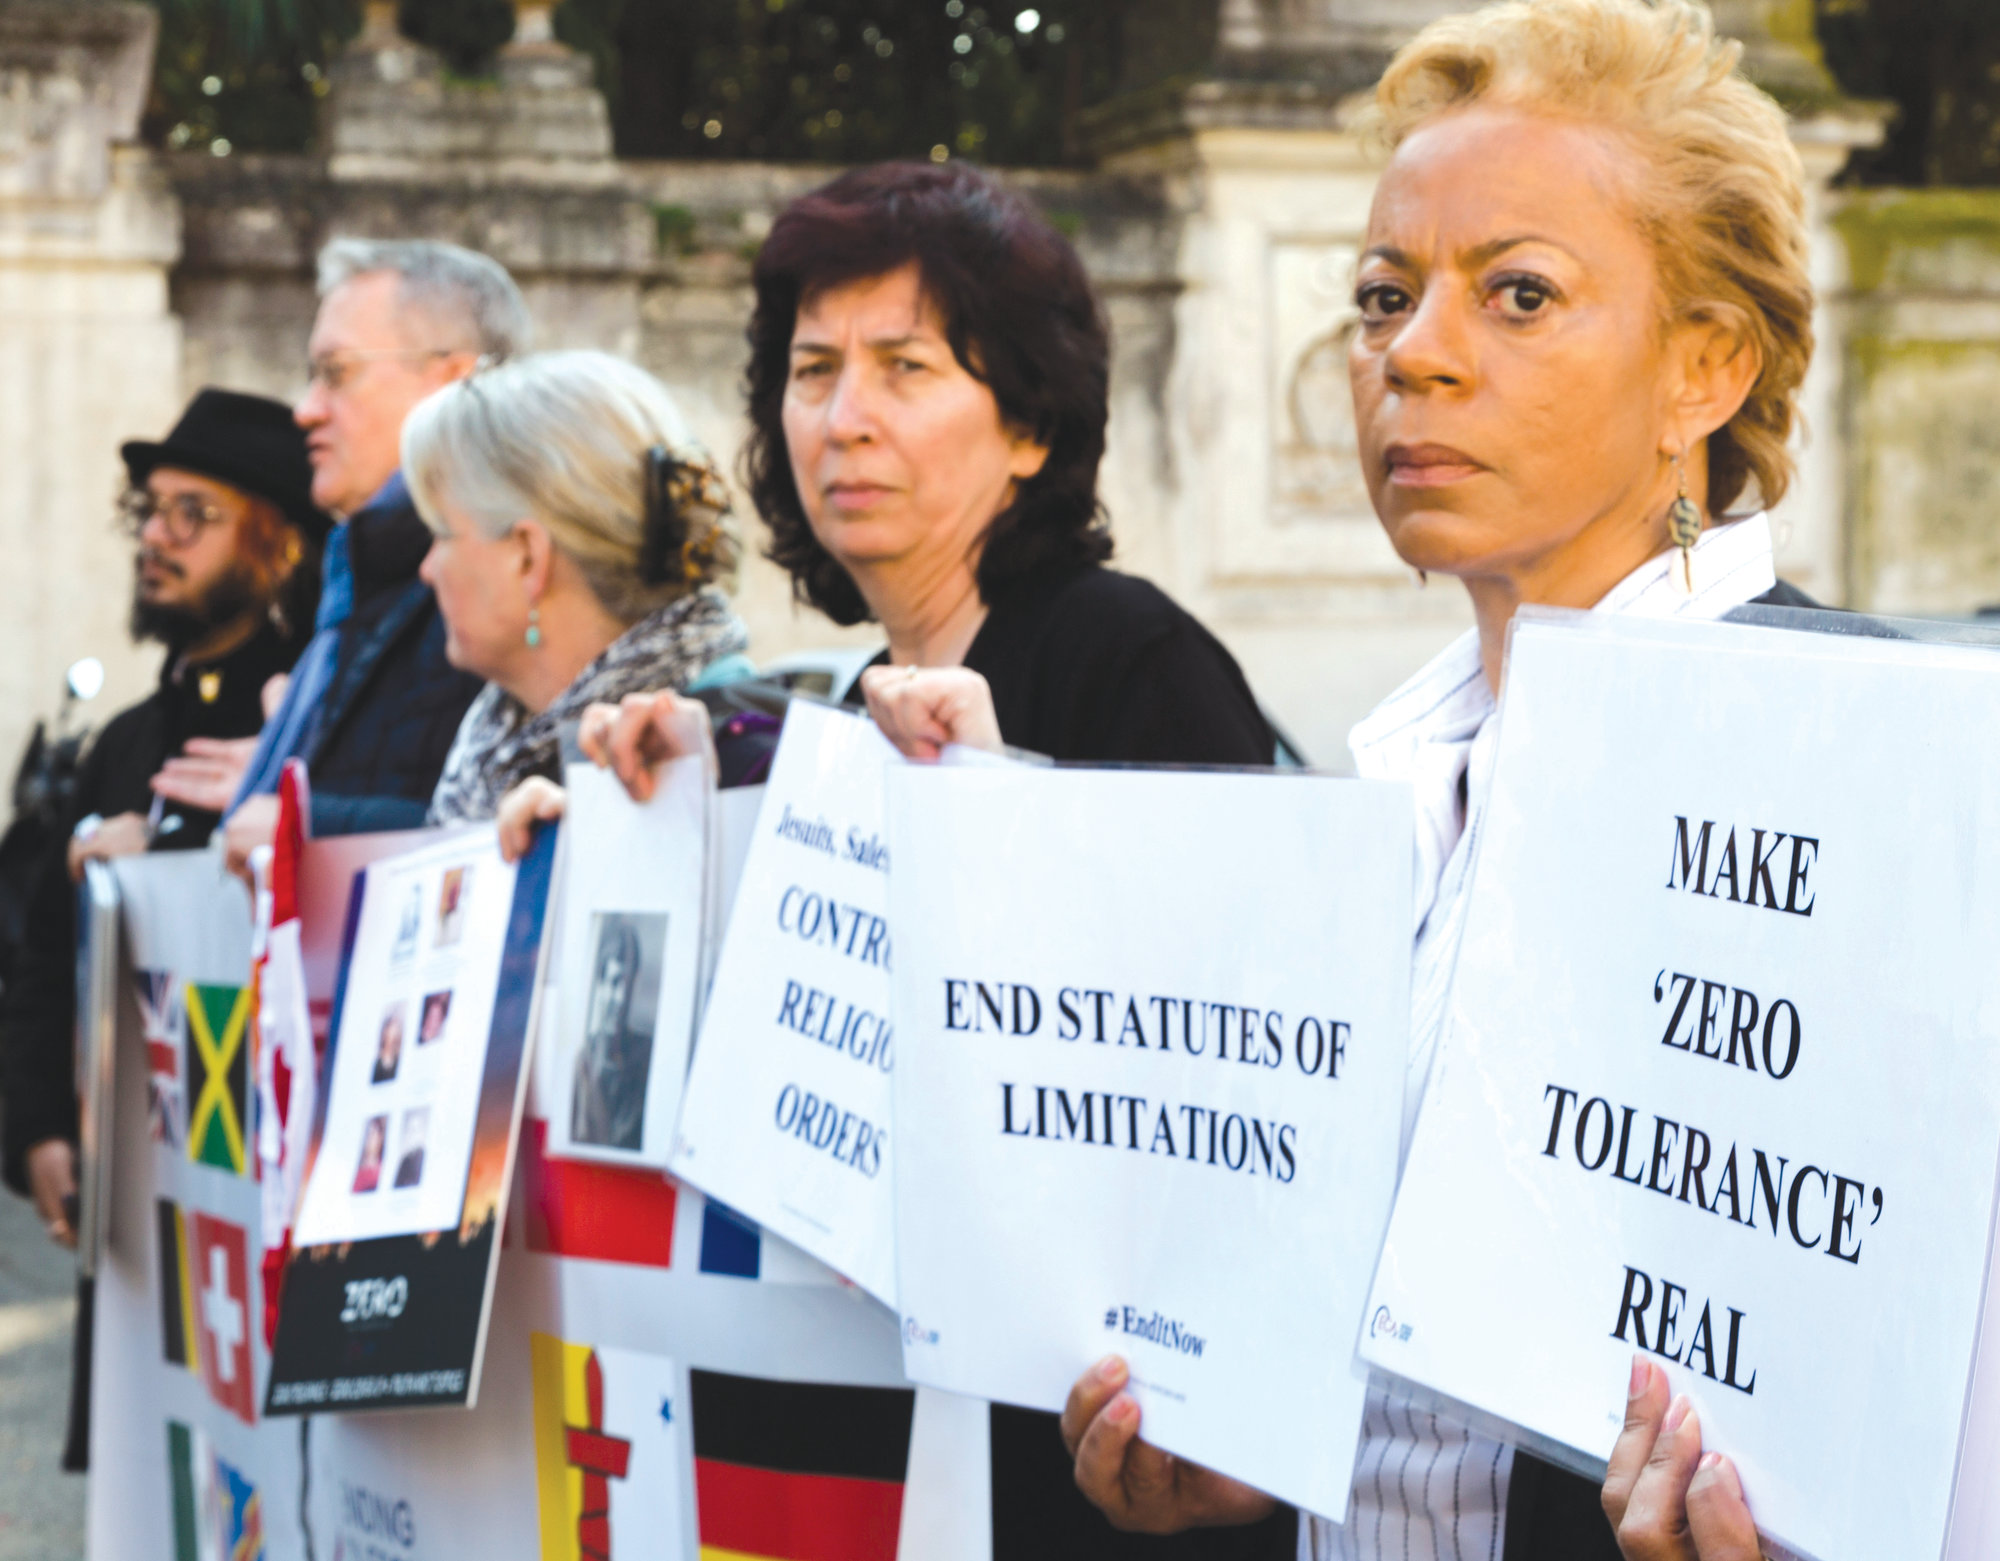 Psychoneurologist and founding member of the Ending Clergy Abuse organization Denise Buchanan, right, and member Leona Huggins, second from right, participate in a protest outside the St. Anselm on the Aventine Benedictine complex in Rome on the second day of a summit called by Pope Francis at the Vatican on sex abuse in the Catholic Church on Friday. Pope Francis has issued 21 proposals to stem the clergy sex abuse around the world, calling for specific protocols to handle